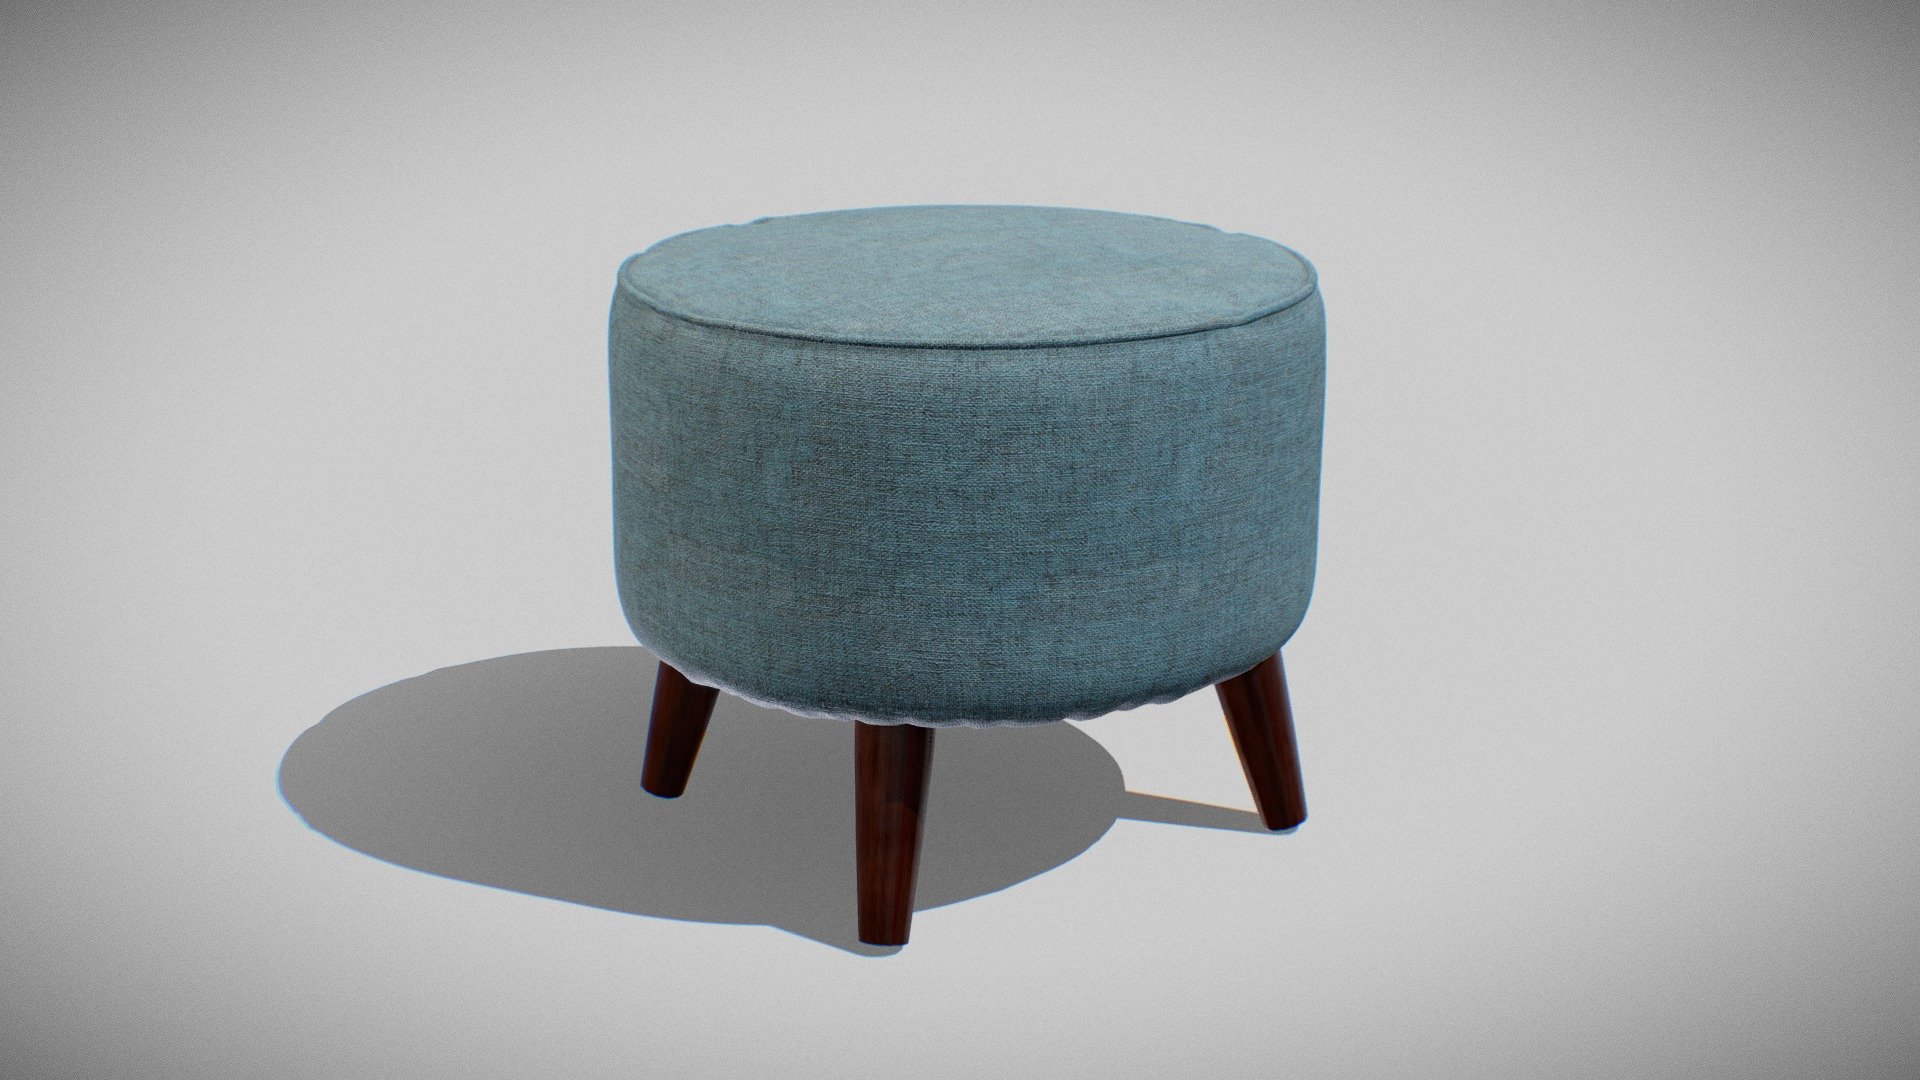 3d model of Ottoman chair for using in decoration in architecture interior. The model was created in latest version of Blender and textured in Substance Painter. It is in real proportions.

4096 x 4096 resolution of textures.

Metalnessworkflow- BaseColor, Normal, Metalness,Height, Ambient Occlusion and Roughness Textures - PNG 3d model